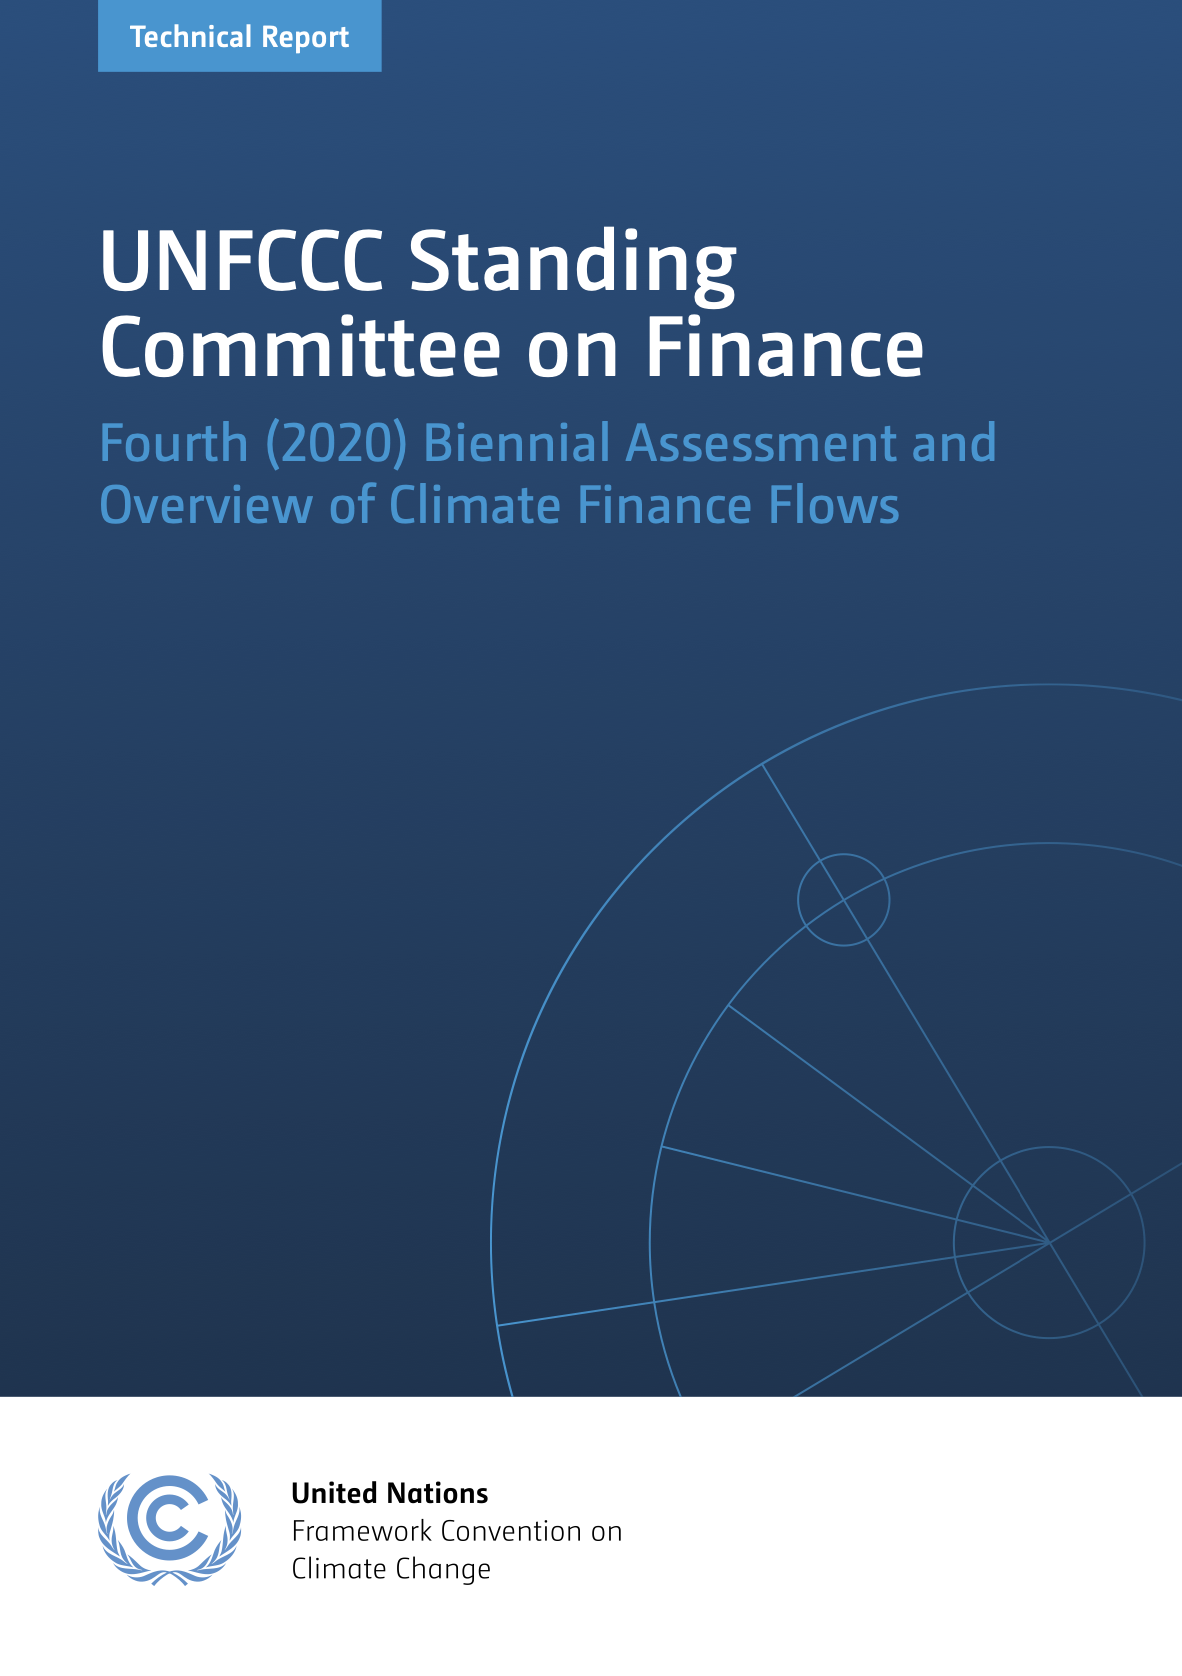 Chapter 4 “Article 2.1c of the Paris Agreement” of the UNFCCC’s 2020 Biennial Assessment Report on Climate Finance Flows